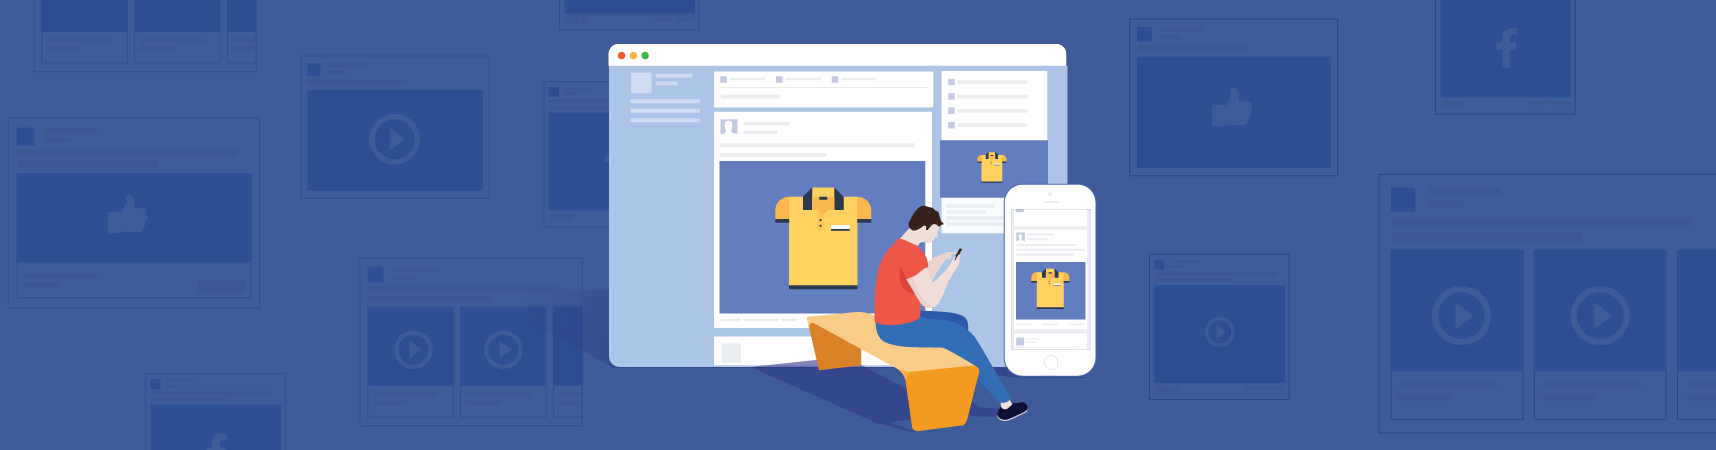 Facebook Carousel Ad Examples: How to Create Campaigns That Convert | Hello  Social